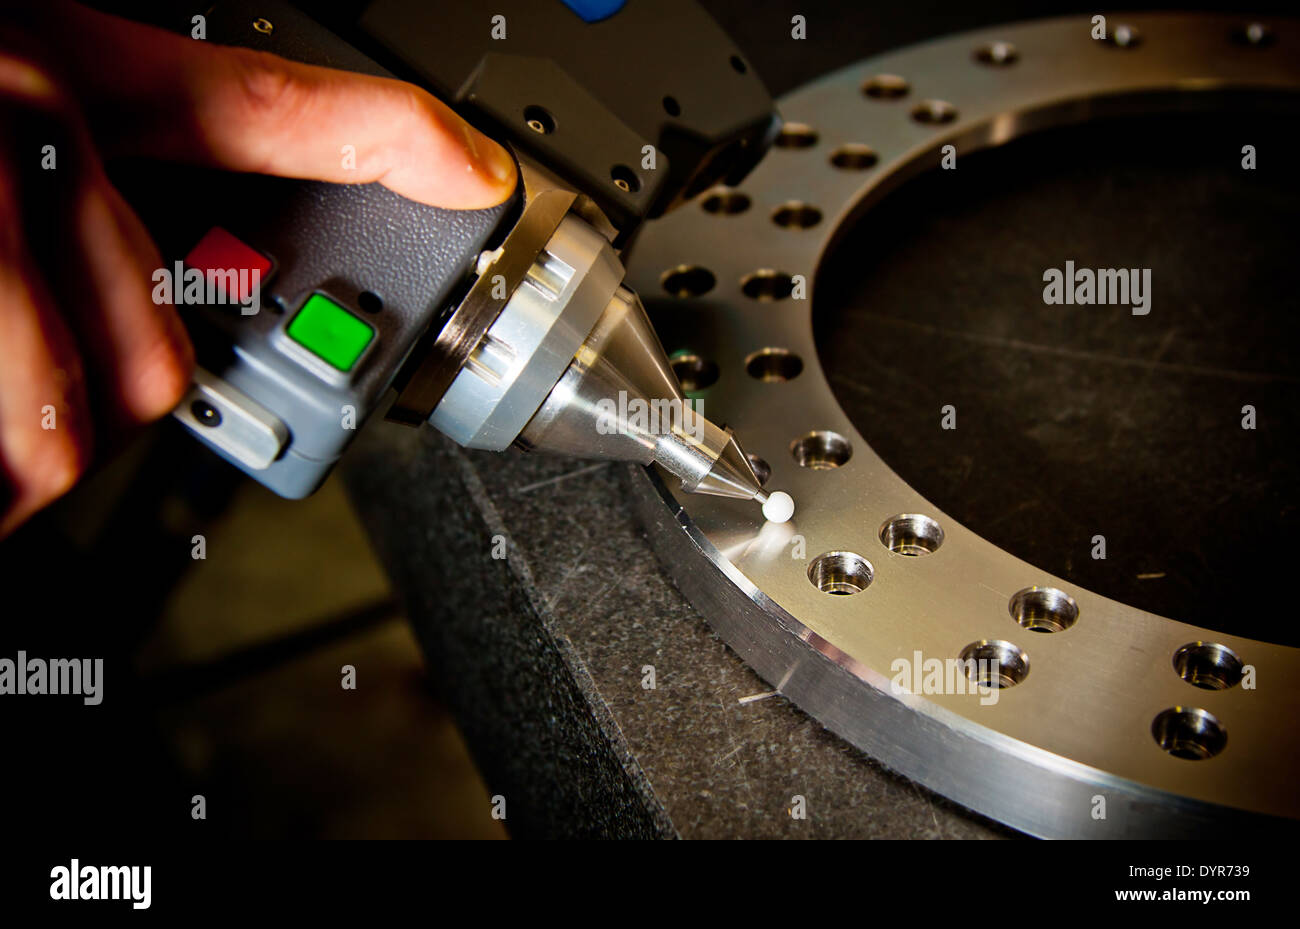 Detail of the tip of a 3d laser scanner mechanical arm. Shallow depth of field, focus on the tip. Stock Photo